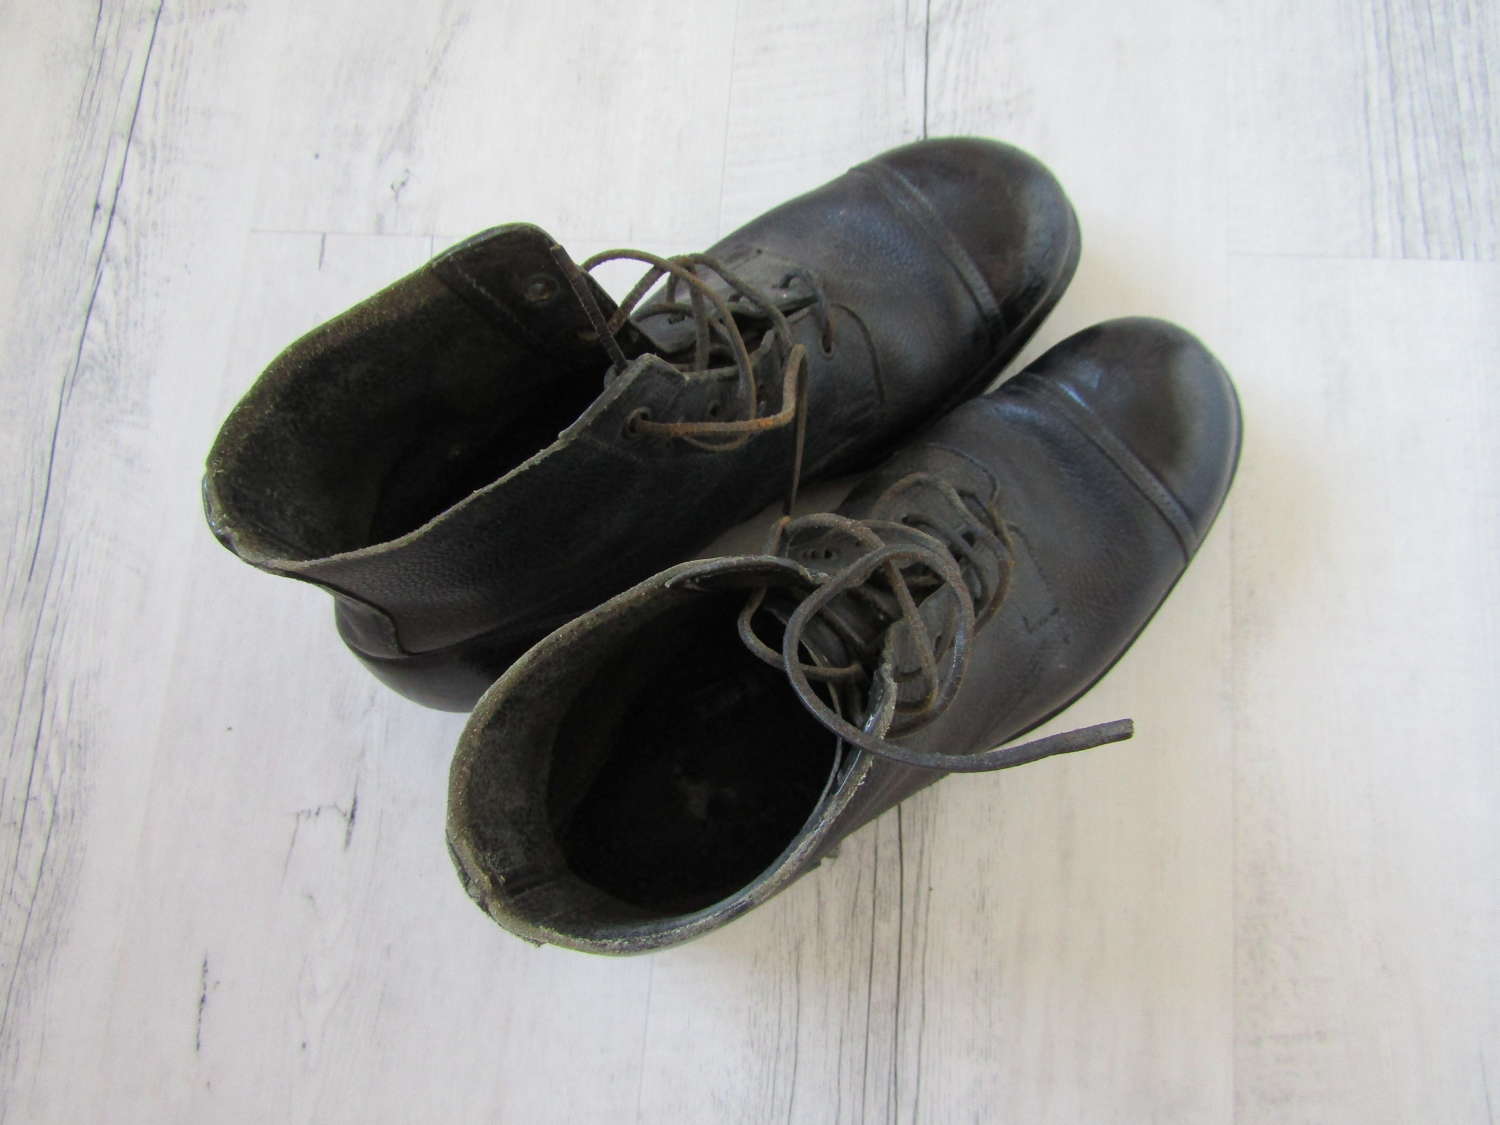 1941 British army boots, large size